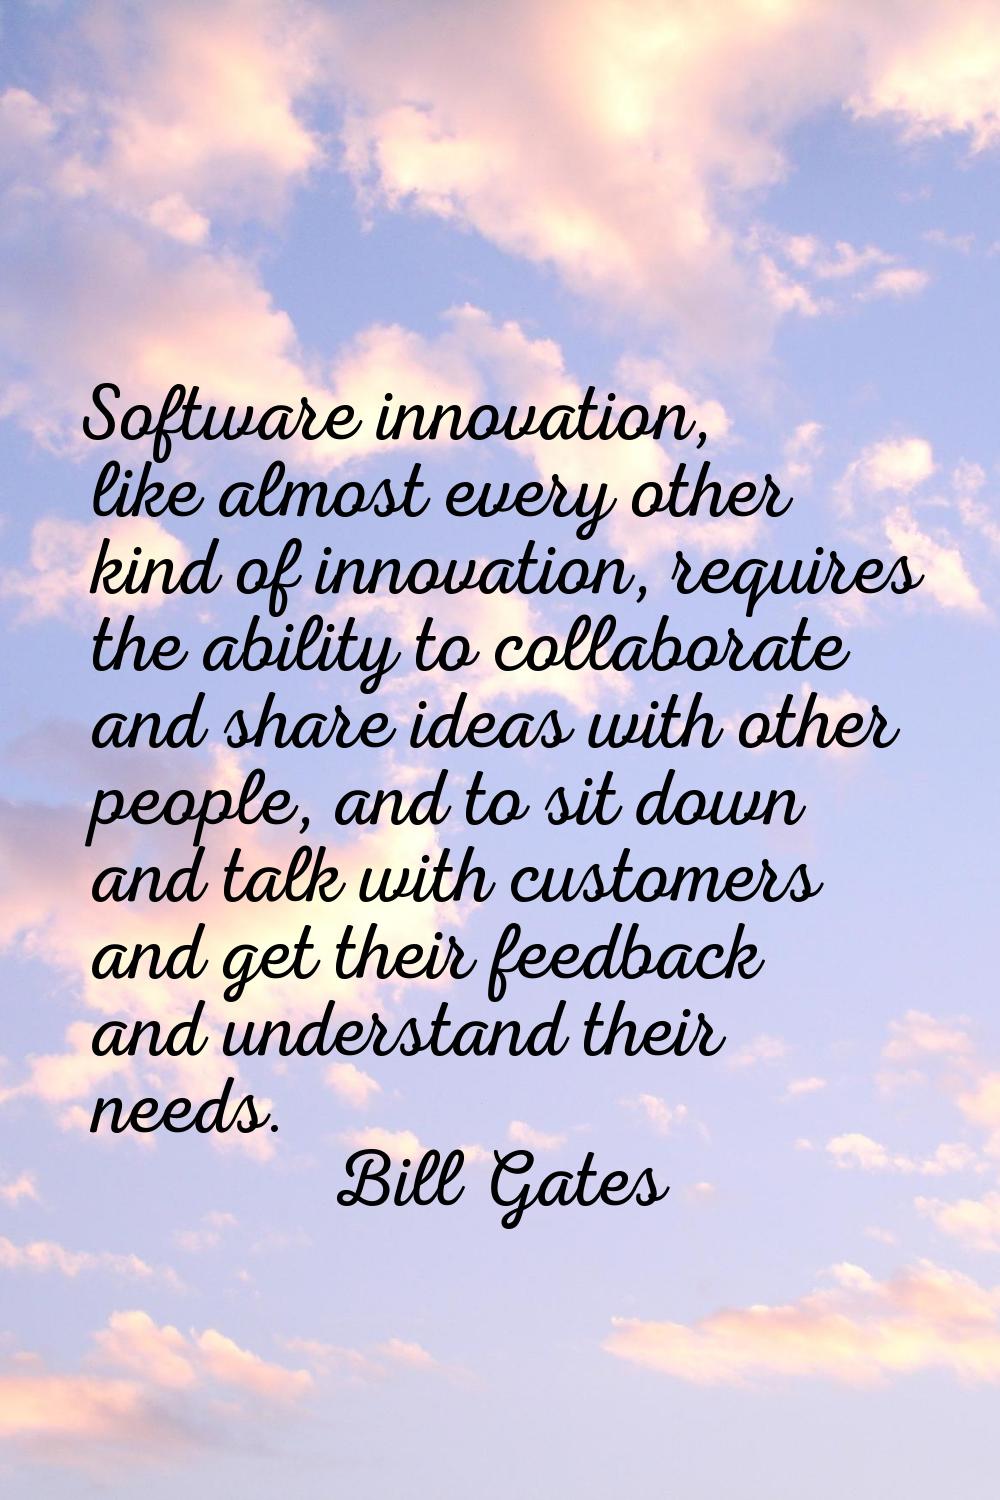 Software innovation, like almost every other kind of innovation, requires the ability to collaborat